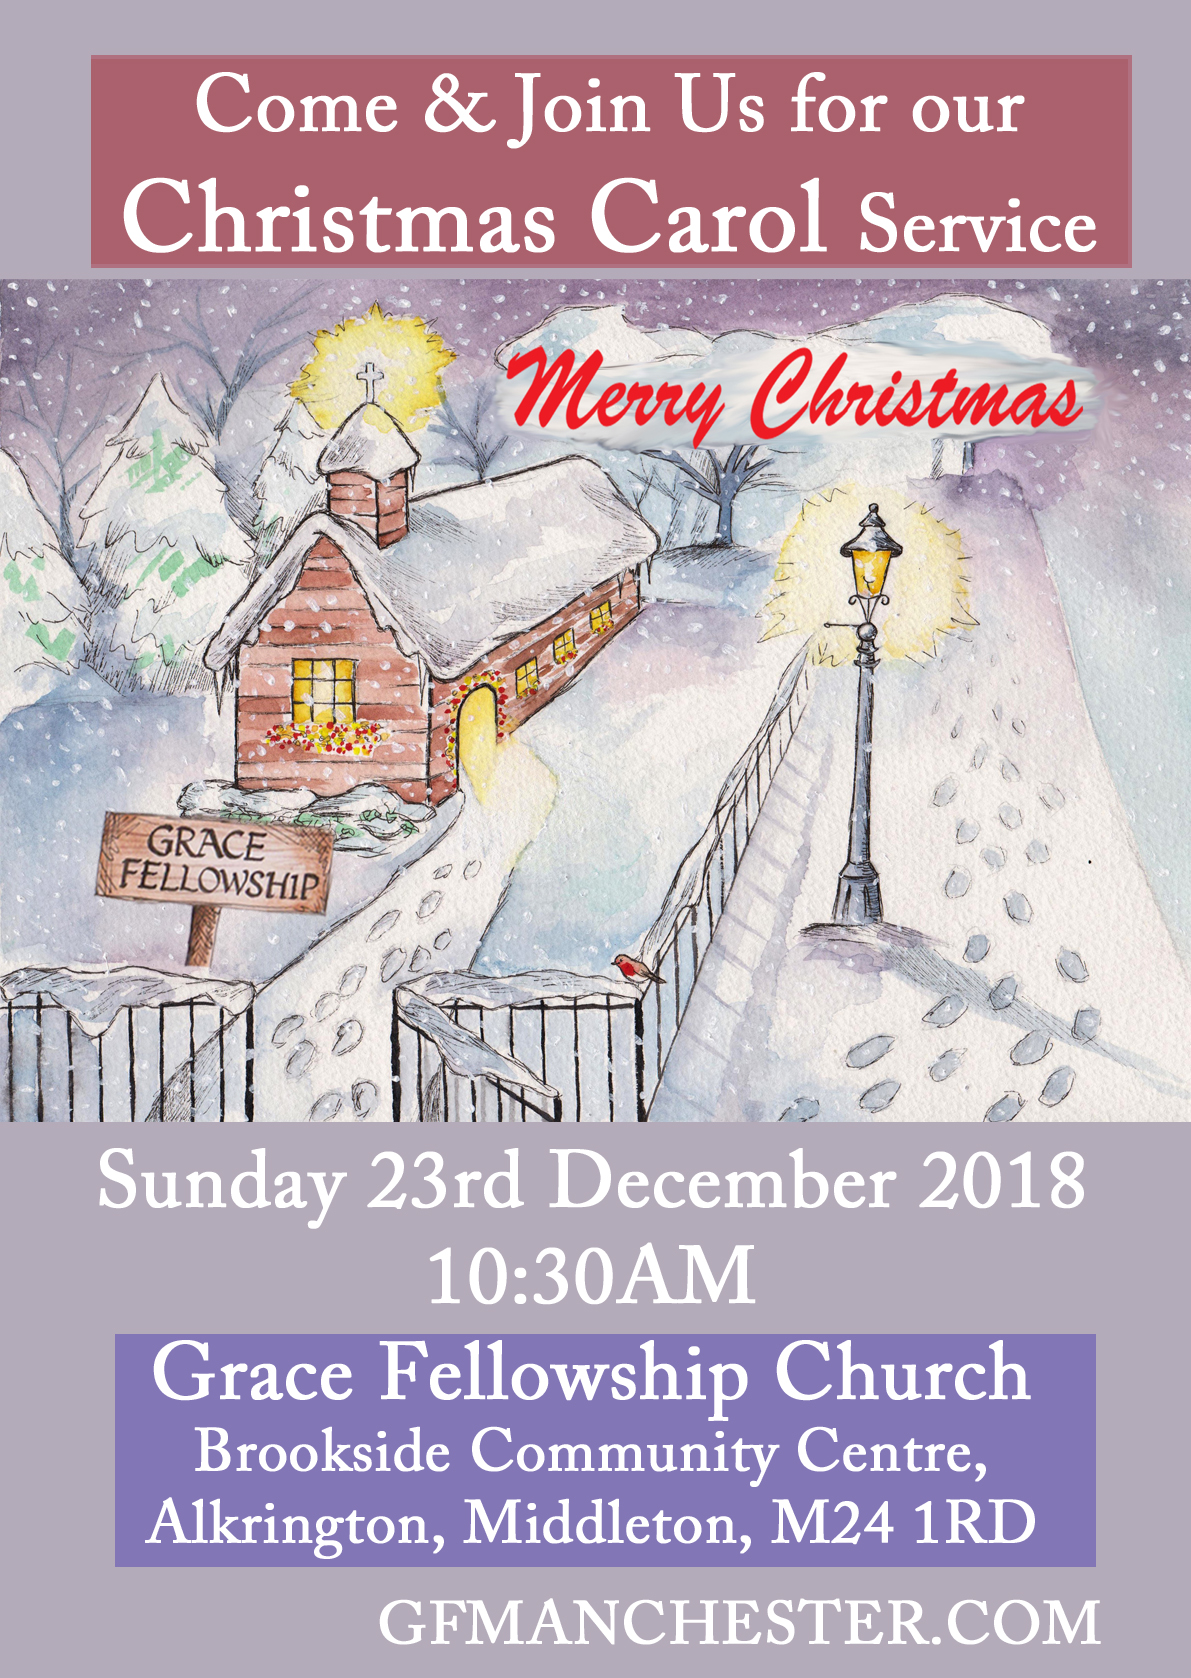 Come & Join Us for our Christmas Carol Service  Sunday 10.30AM  23rd December 2018